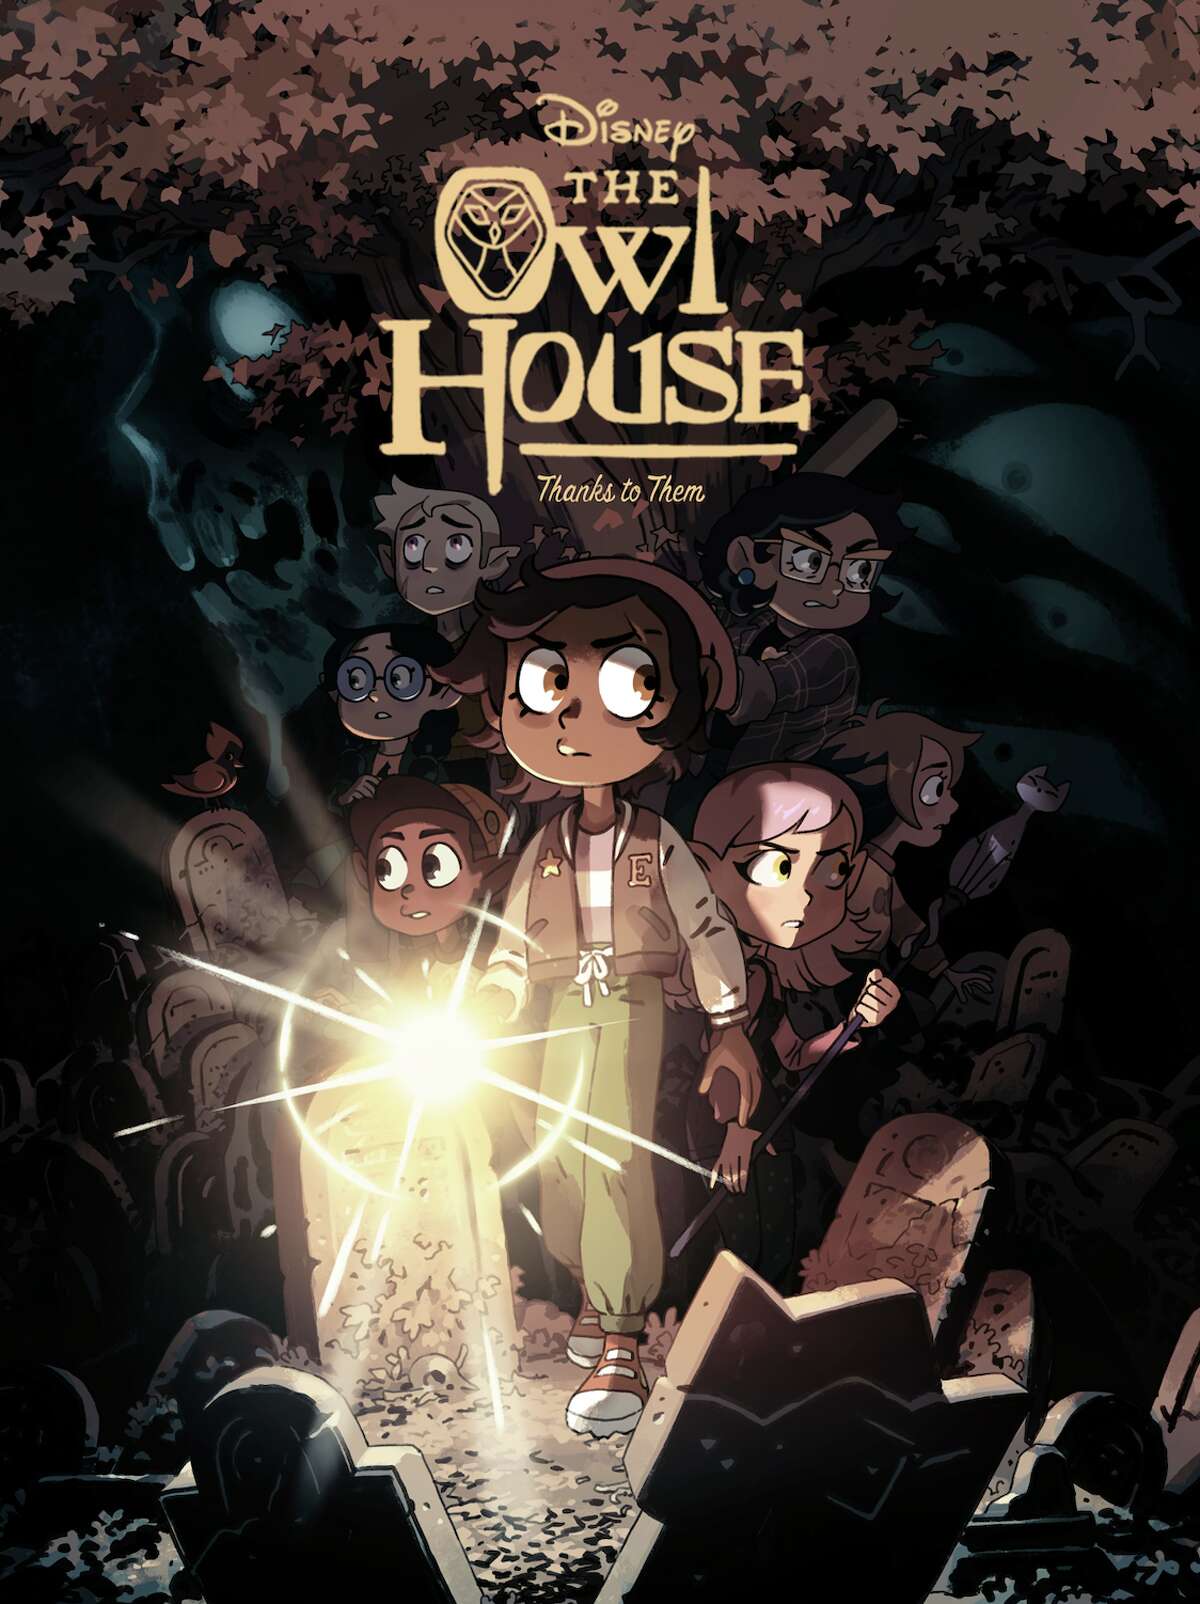 The Owl House” Features Disney Channel's First Bisexual Lead Character